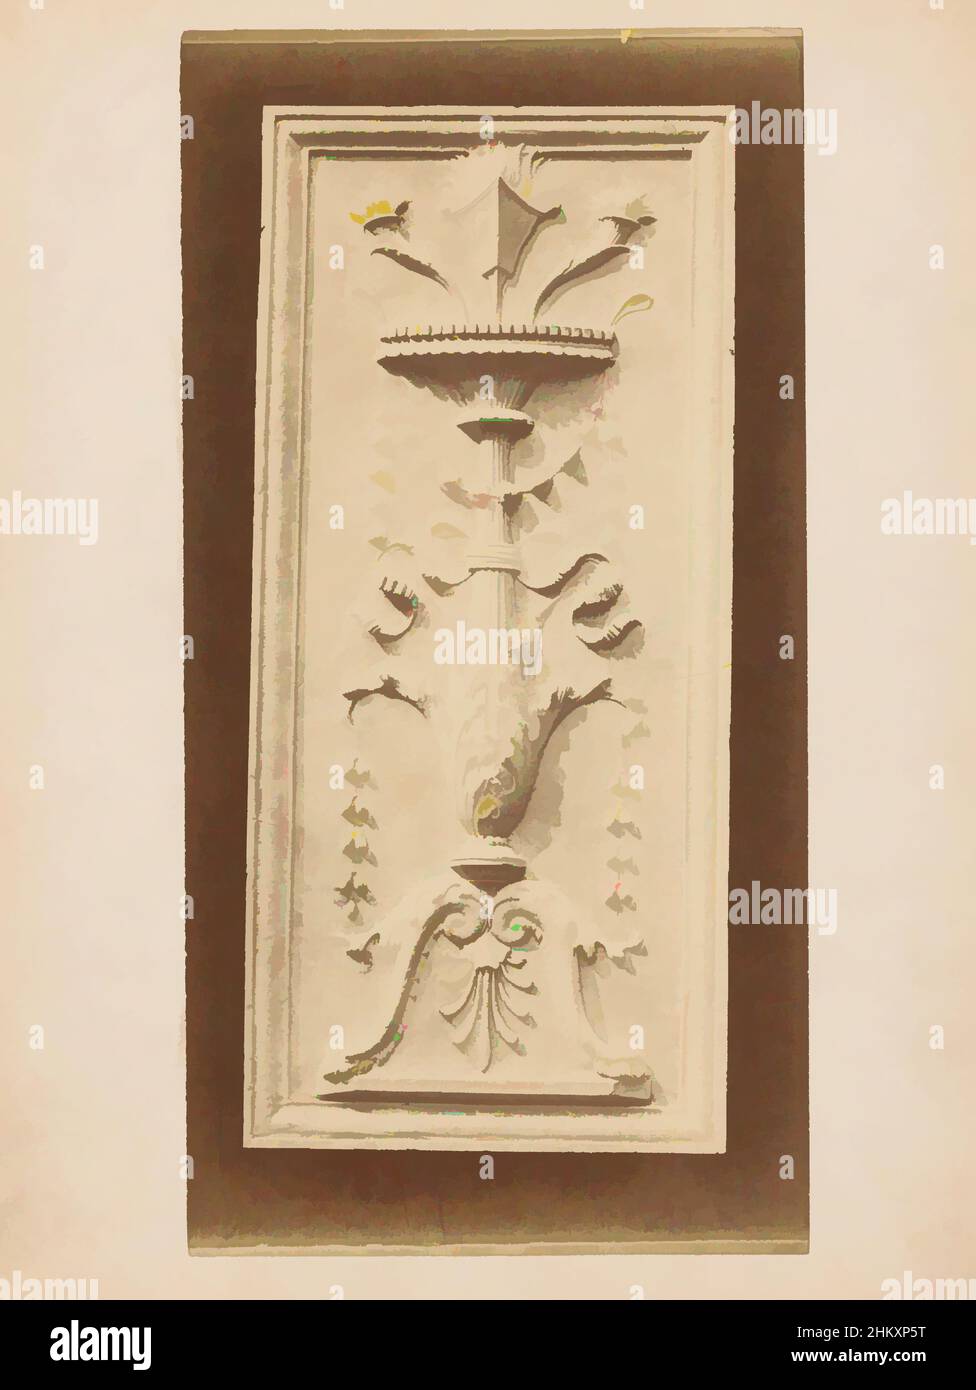 Art inspired by Relief with a candelabrum, c. 1875 - c. 1900, cardboard, albumen print, height 276 mm × width 140 mm, Classic works modernized by Artotop with a splash of modernity. Shapes, color and value, eye-catching visual impact on art. Emotions through freedom of artworks in a contemporary way. A timeless message pursuing a wildly creative new direction. Artists turning to the digital medium and creating the Artotop NFT Stock Photo